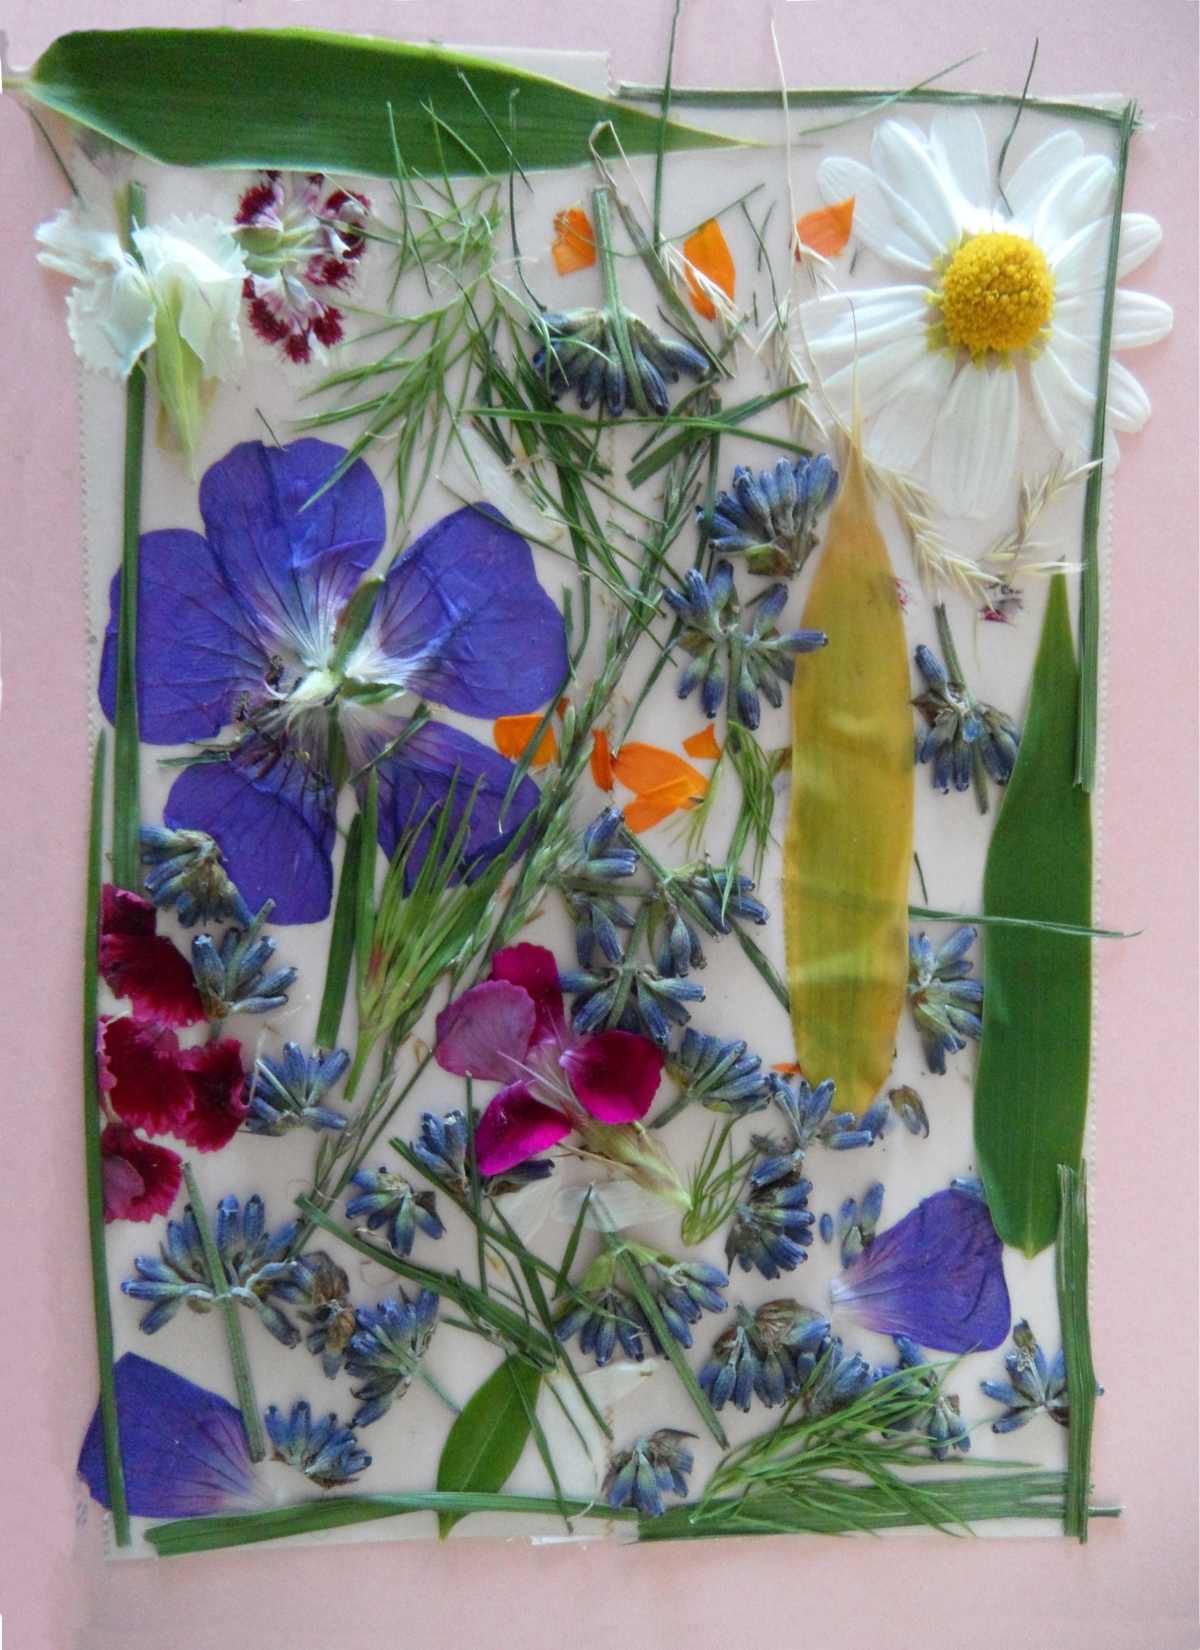 Herbarium cover with flowers